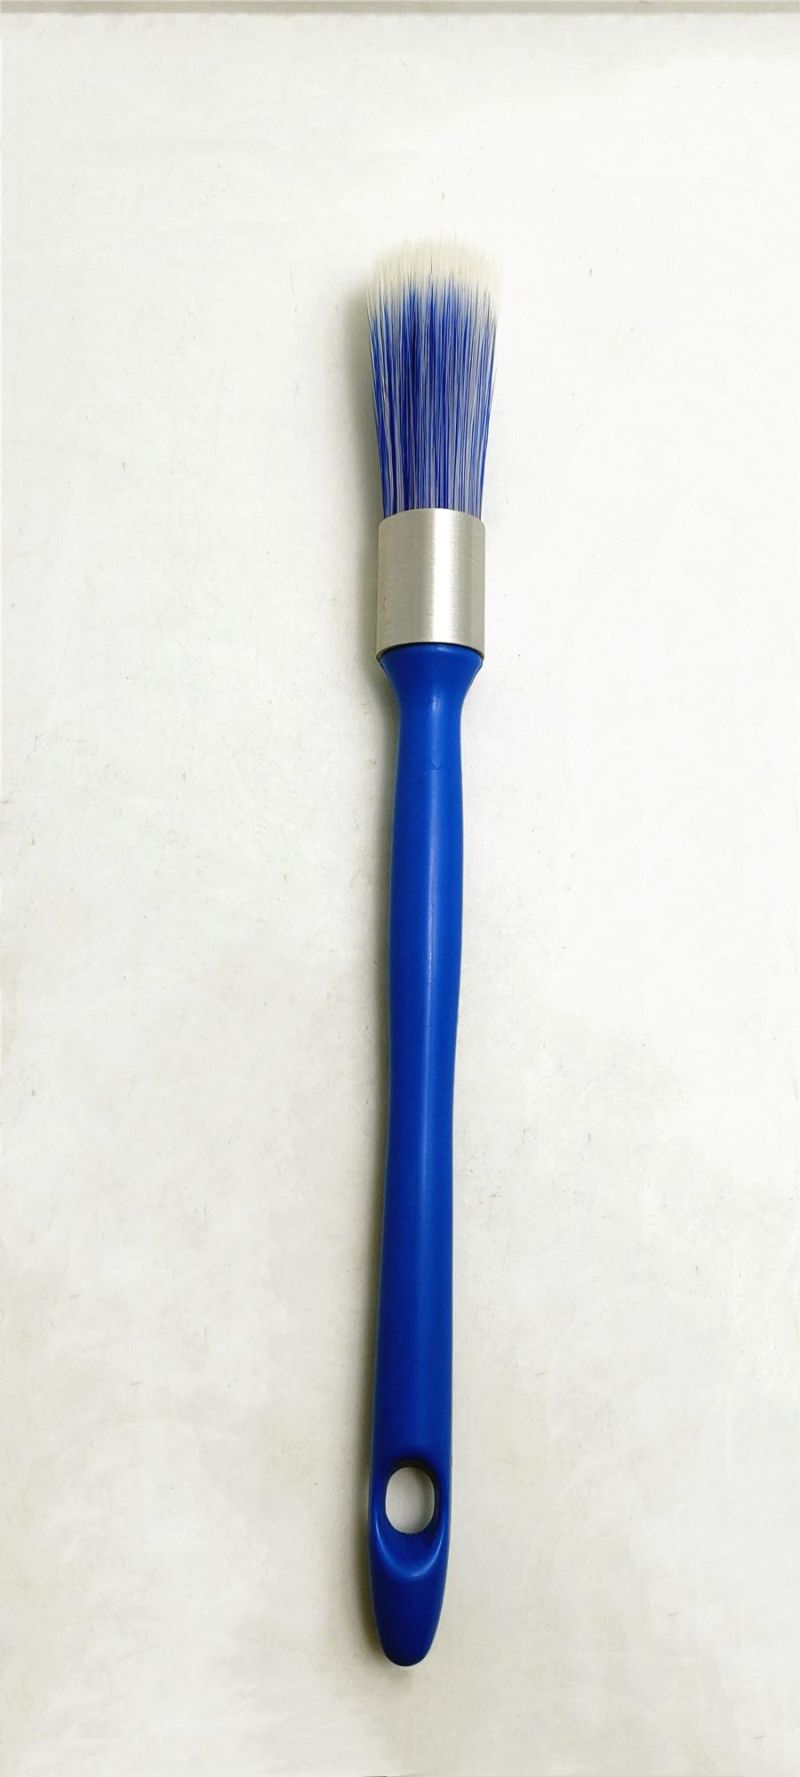 Rubber Handle Round Head Factory Made Paint Brush